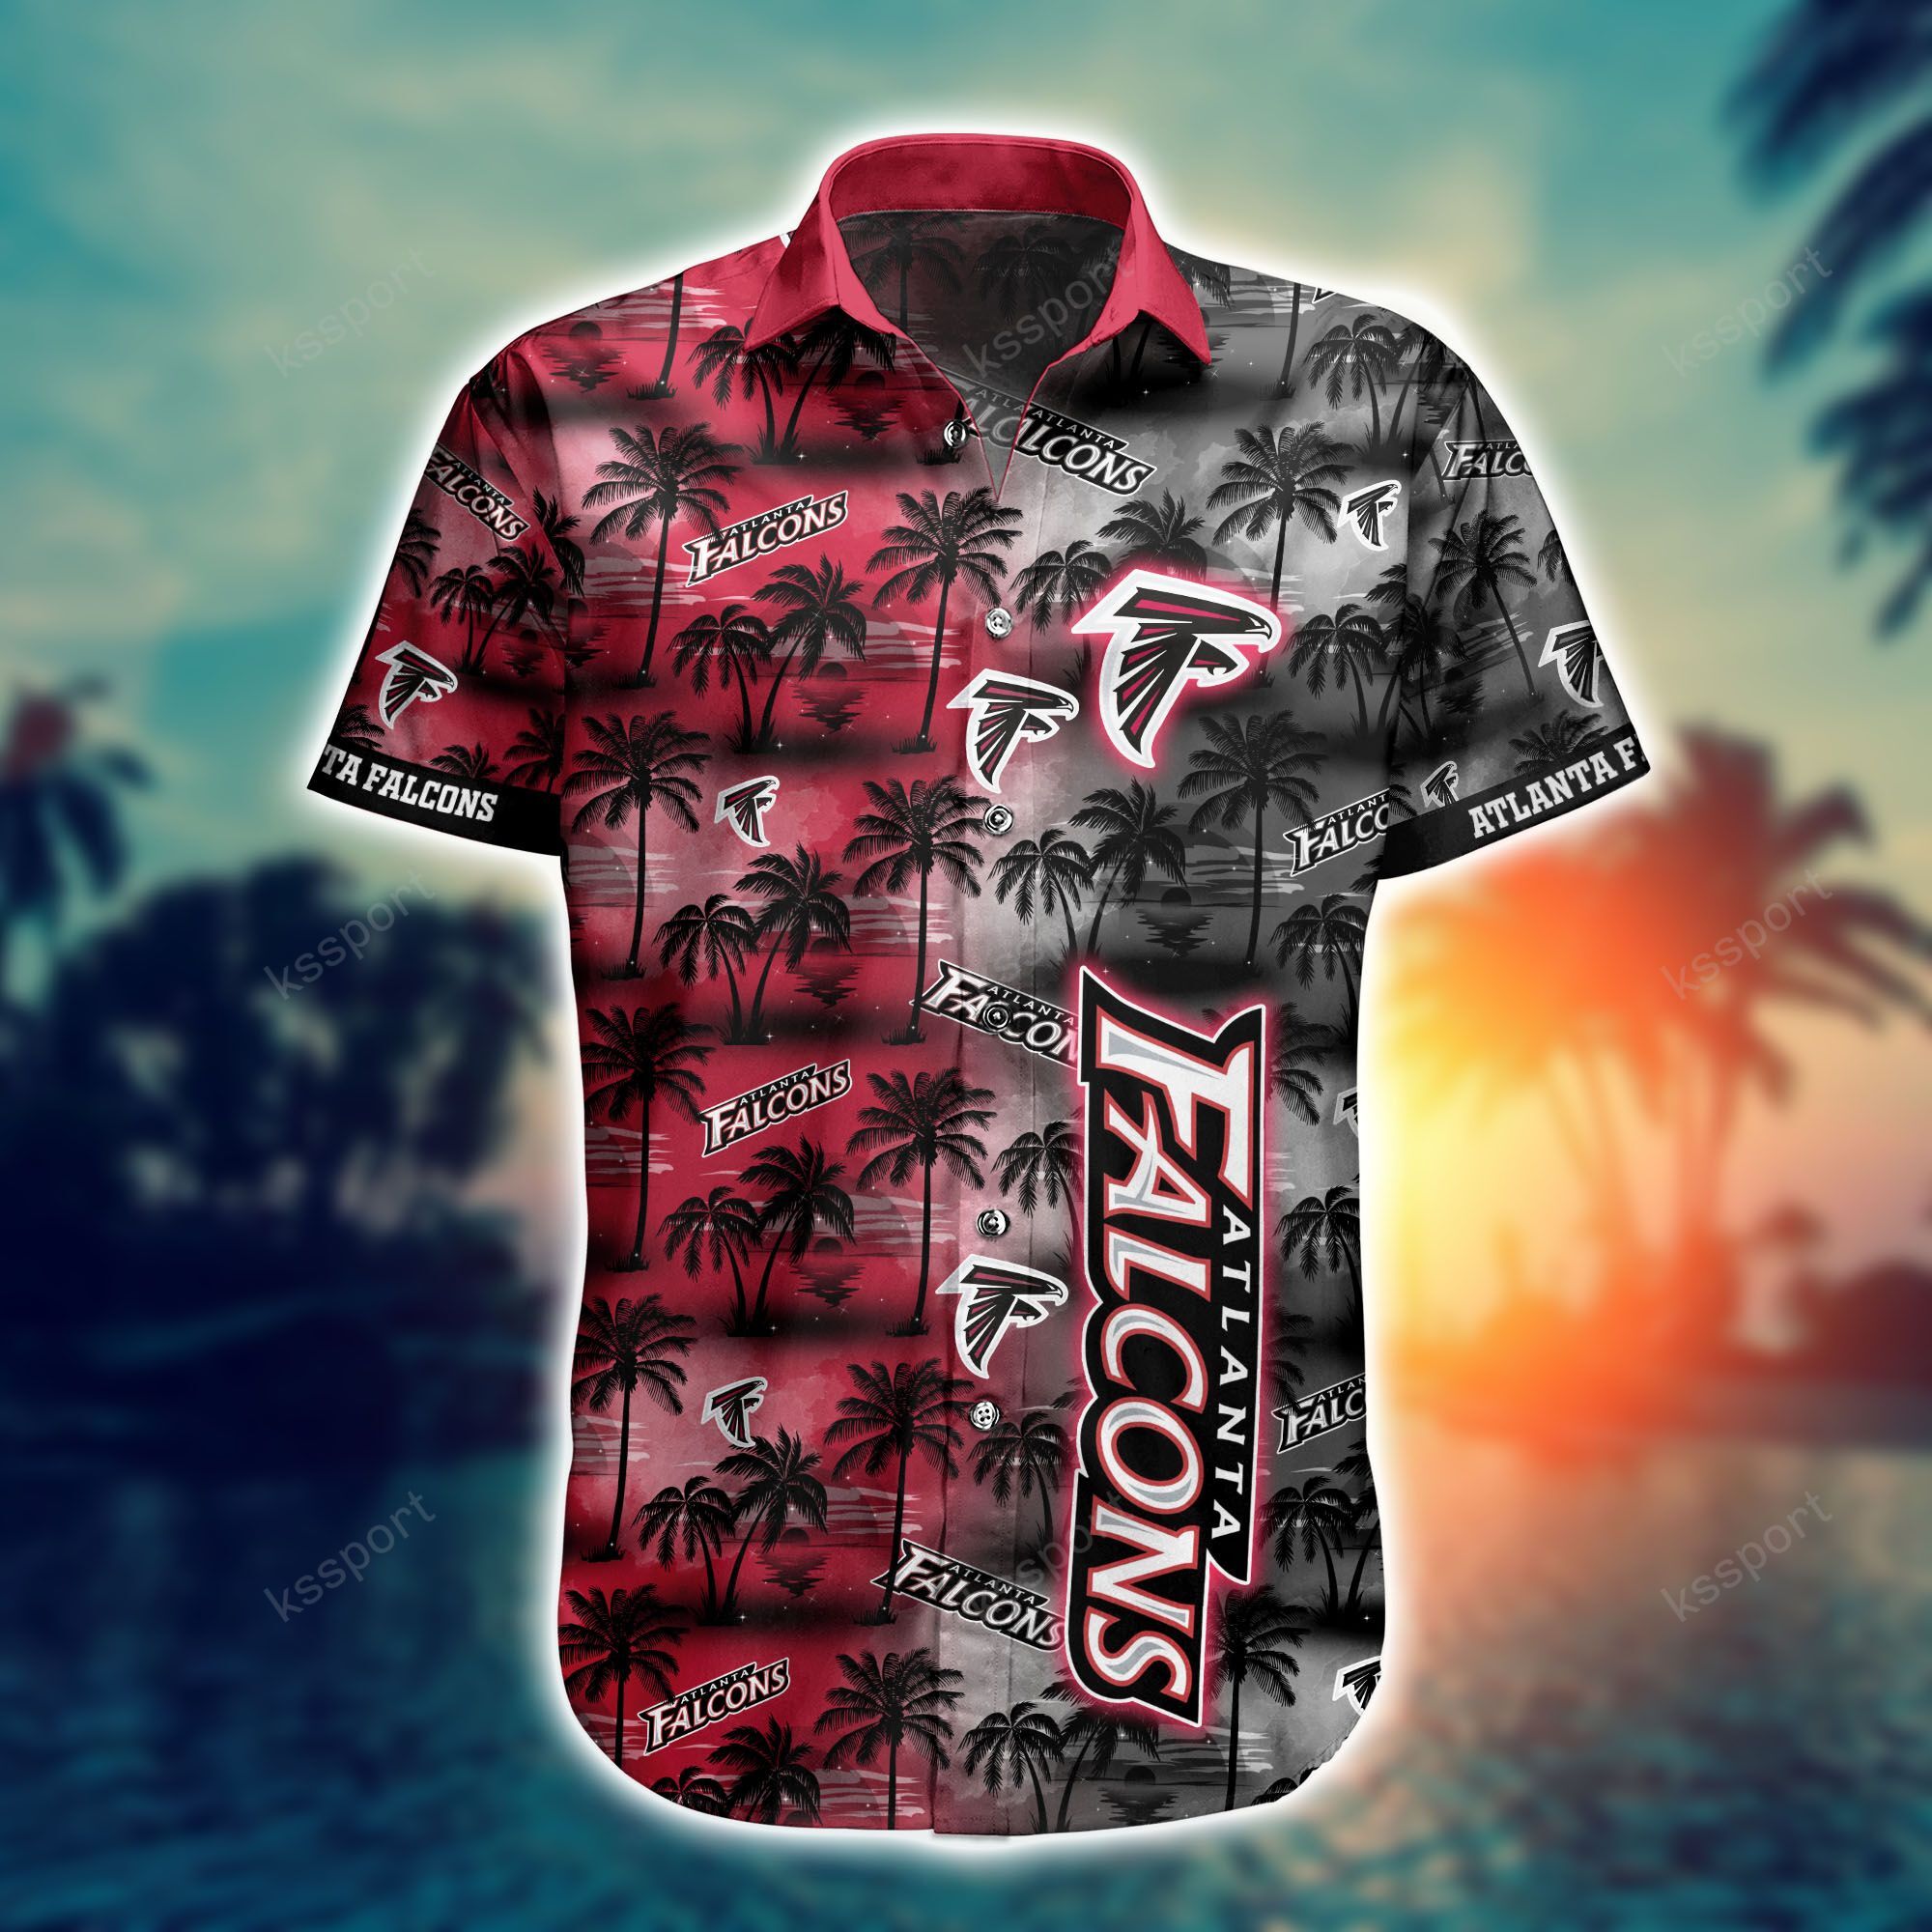 Top cool Hawaiian shirt 2022 - Make sure you get yours today before they run out! 191